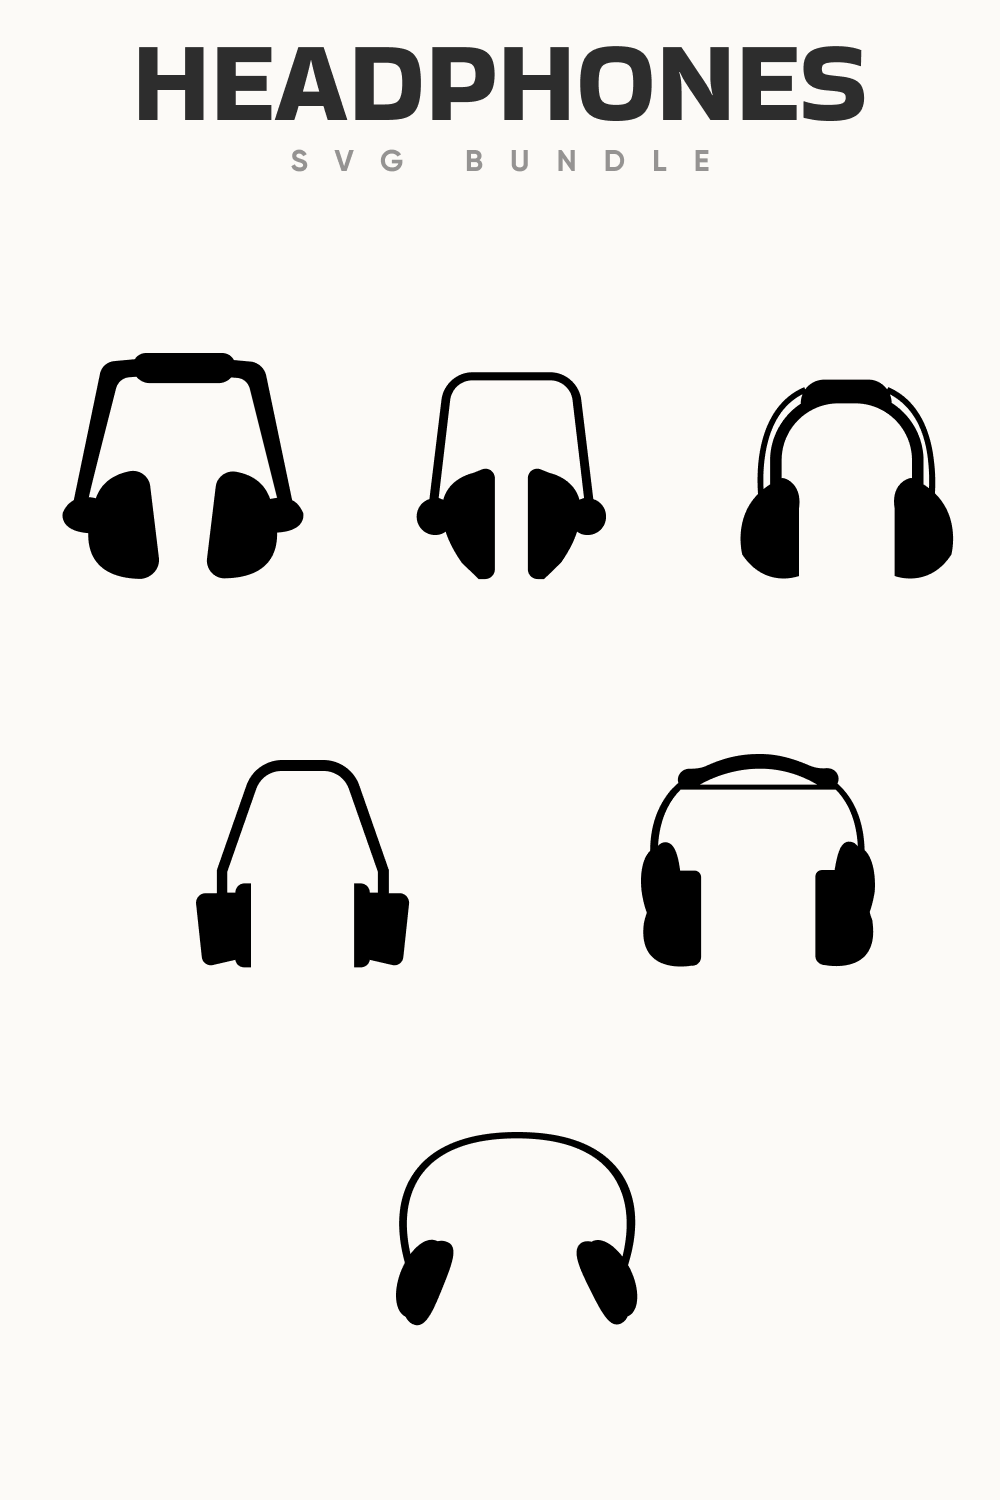 Some diverse of the headphones.